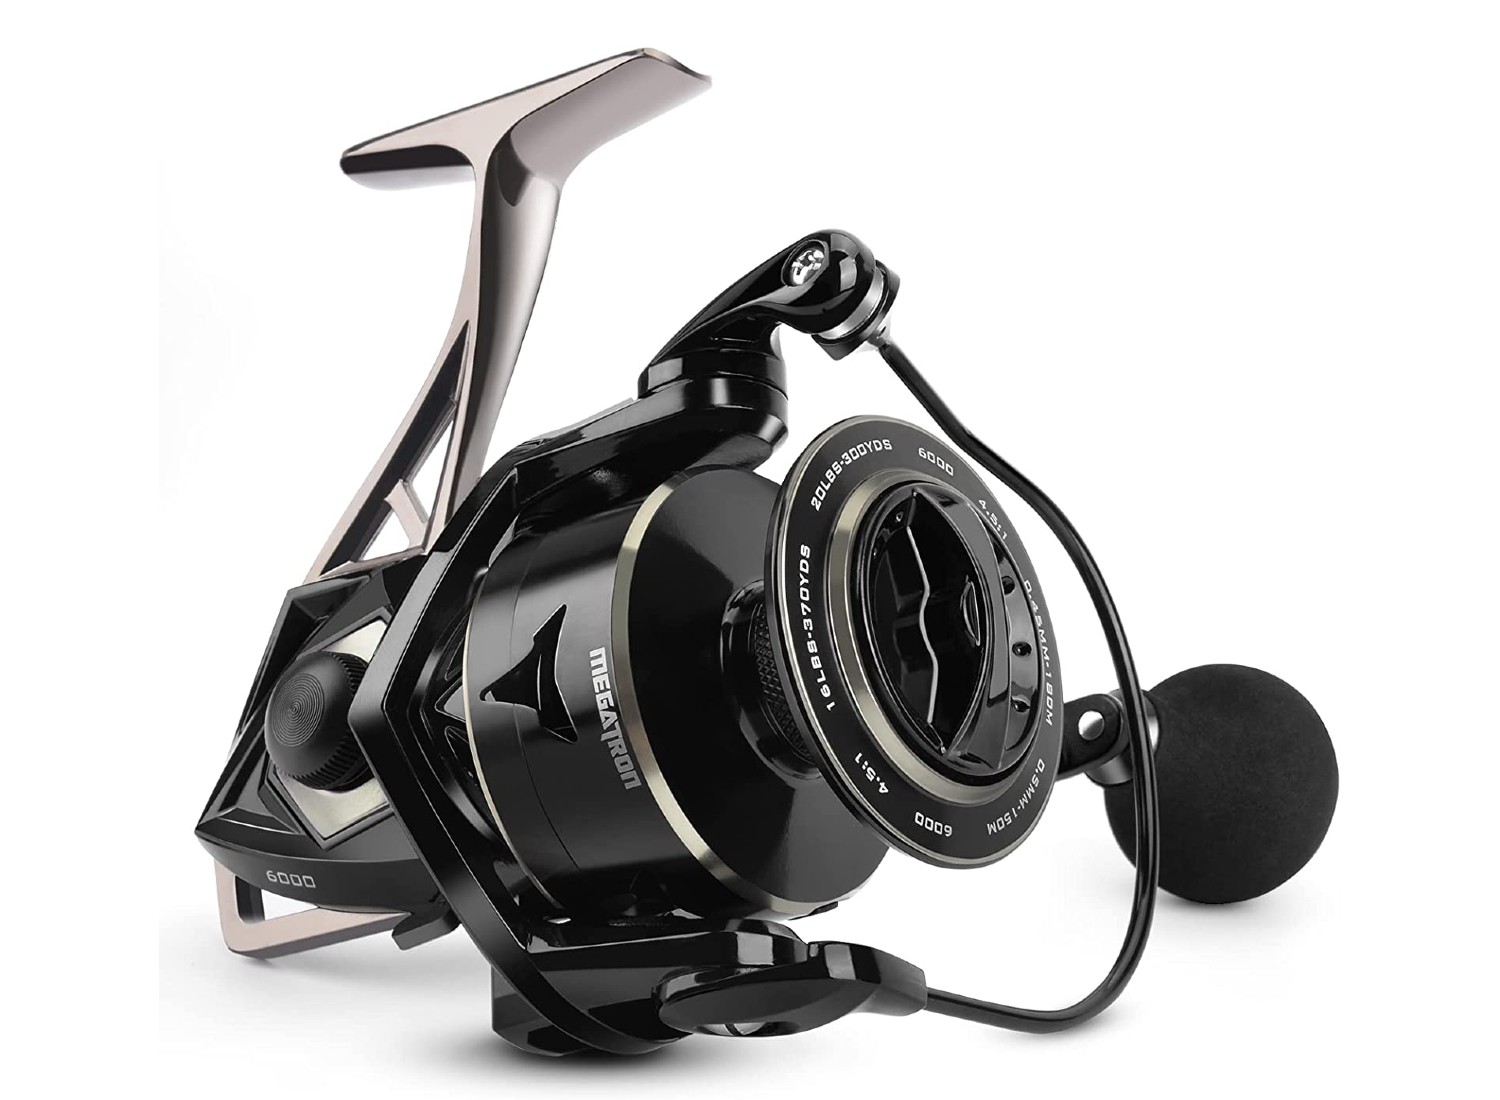 Are the Bearings Used In KastKing Reels Sealed for Saltwater Use?